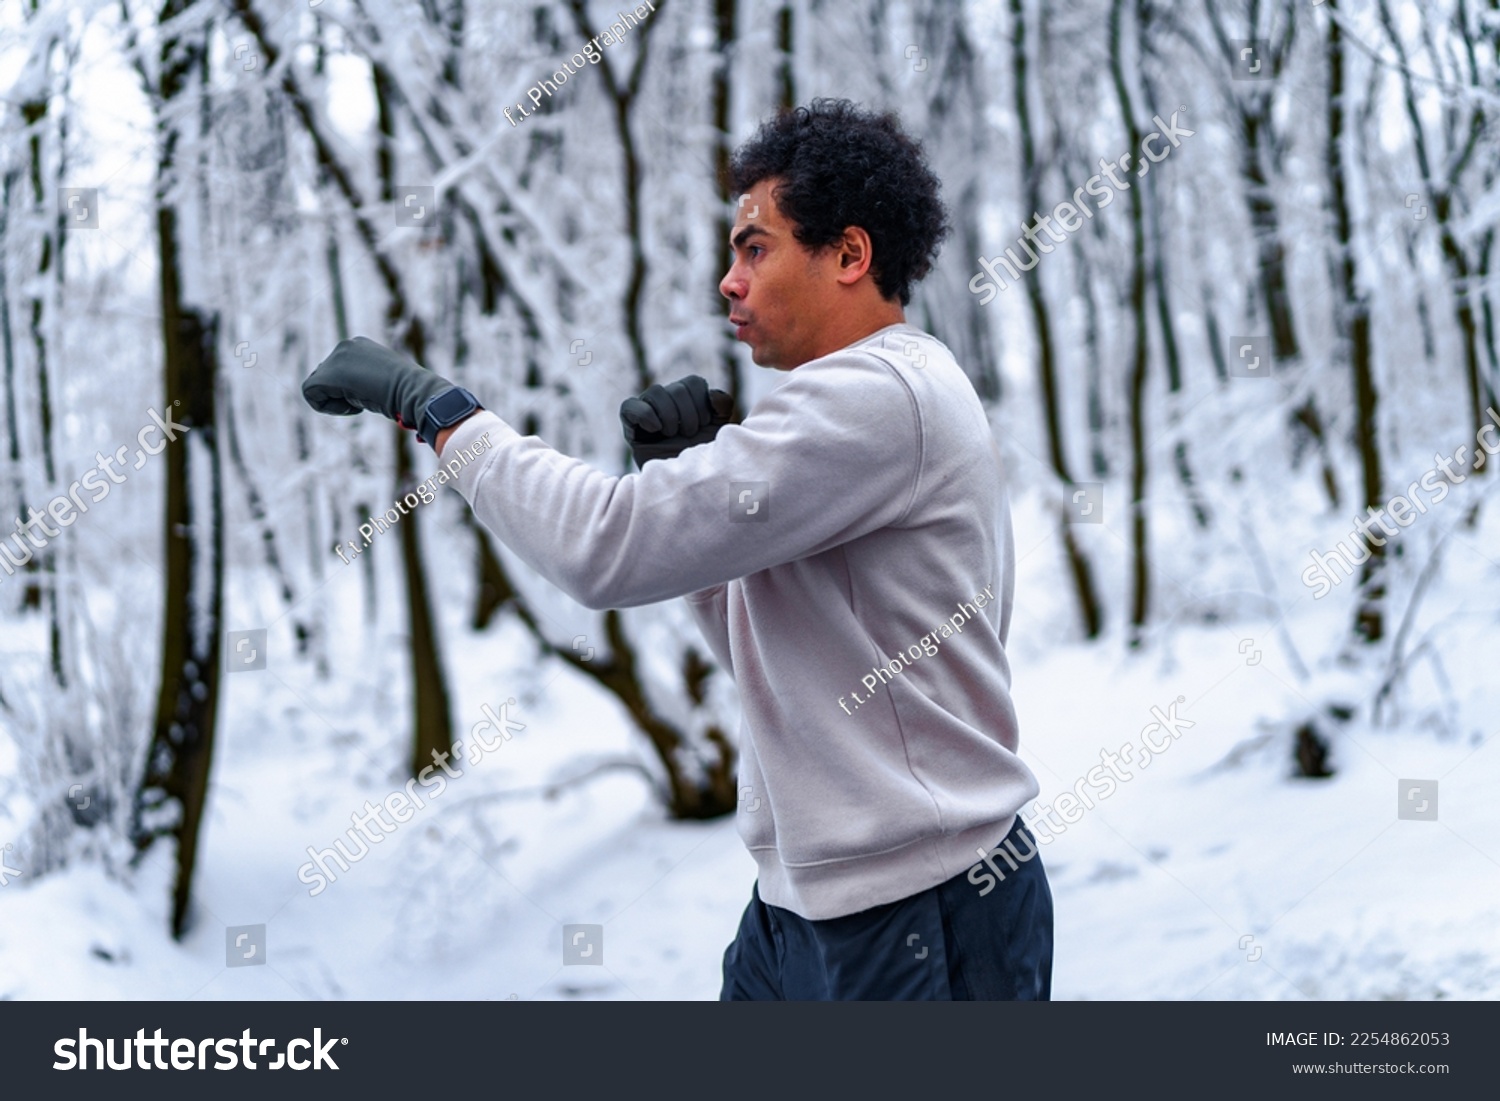 man trains boxing in winter by conducting shadow fight outdoors, in background snow covered forest #2254862053